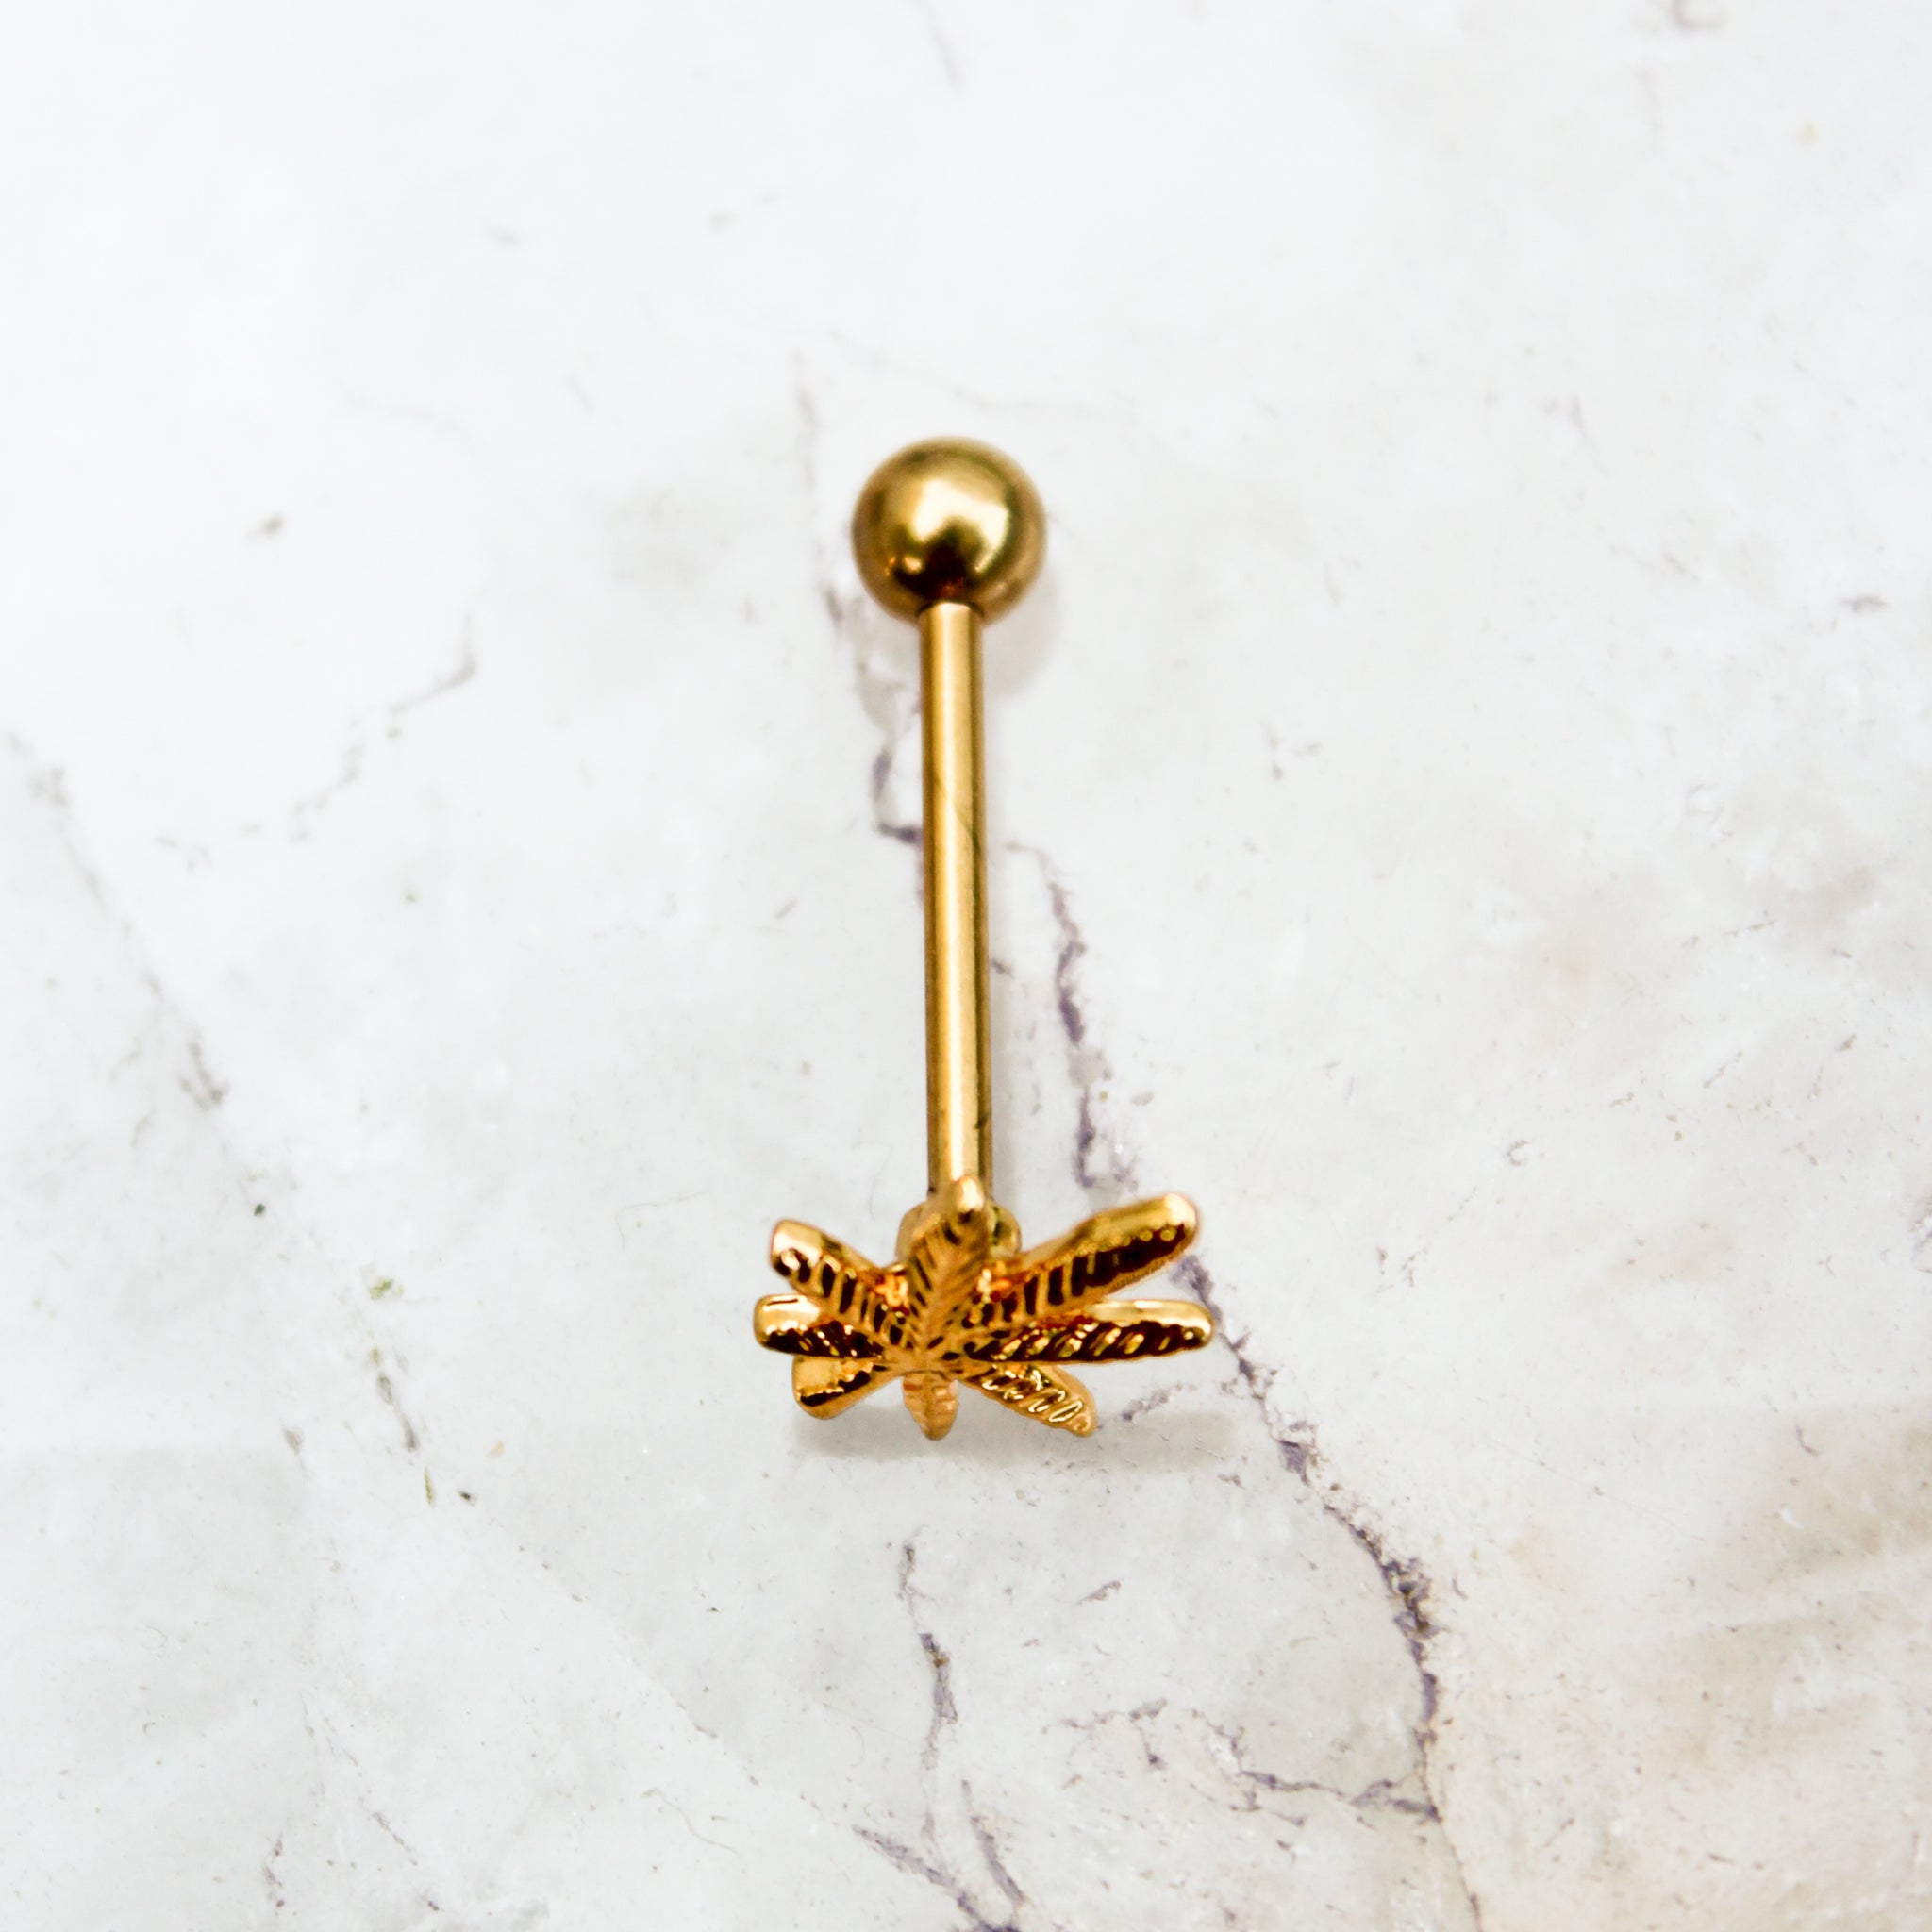 Gold Weed Leaf Tongue Ring - Blunted Objects